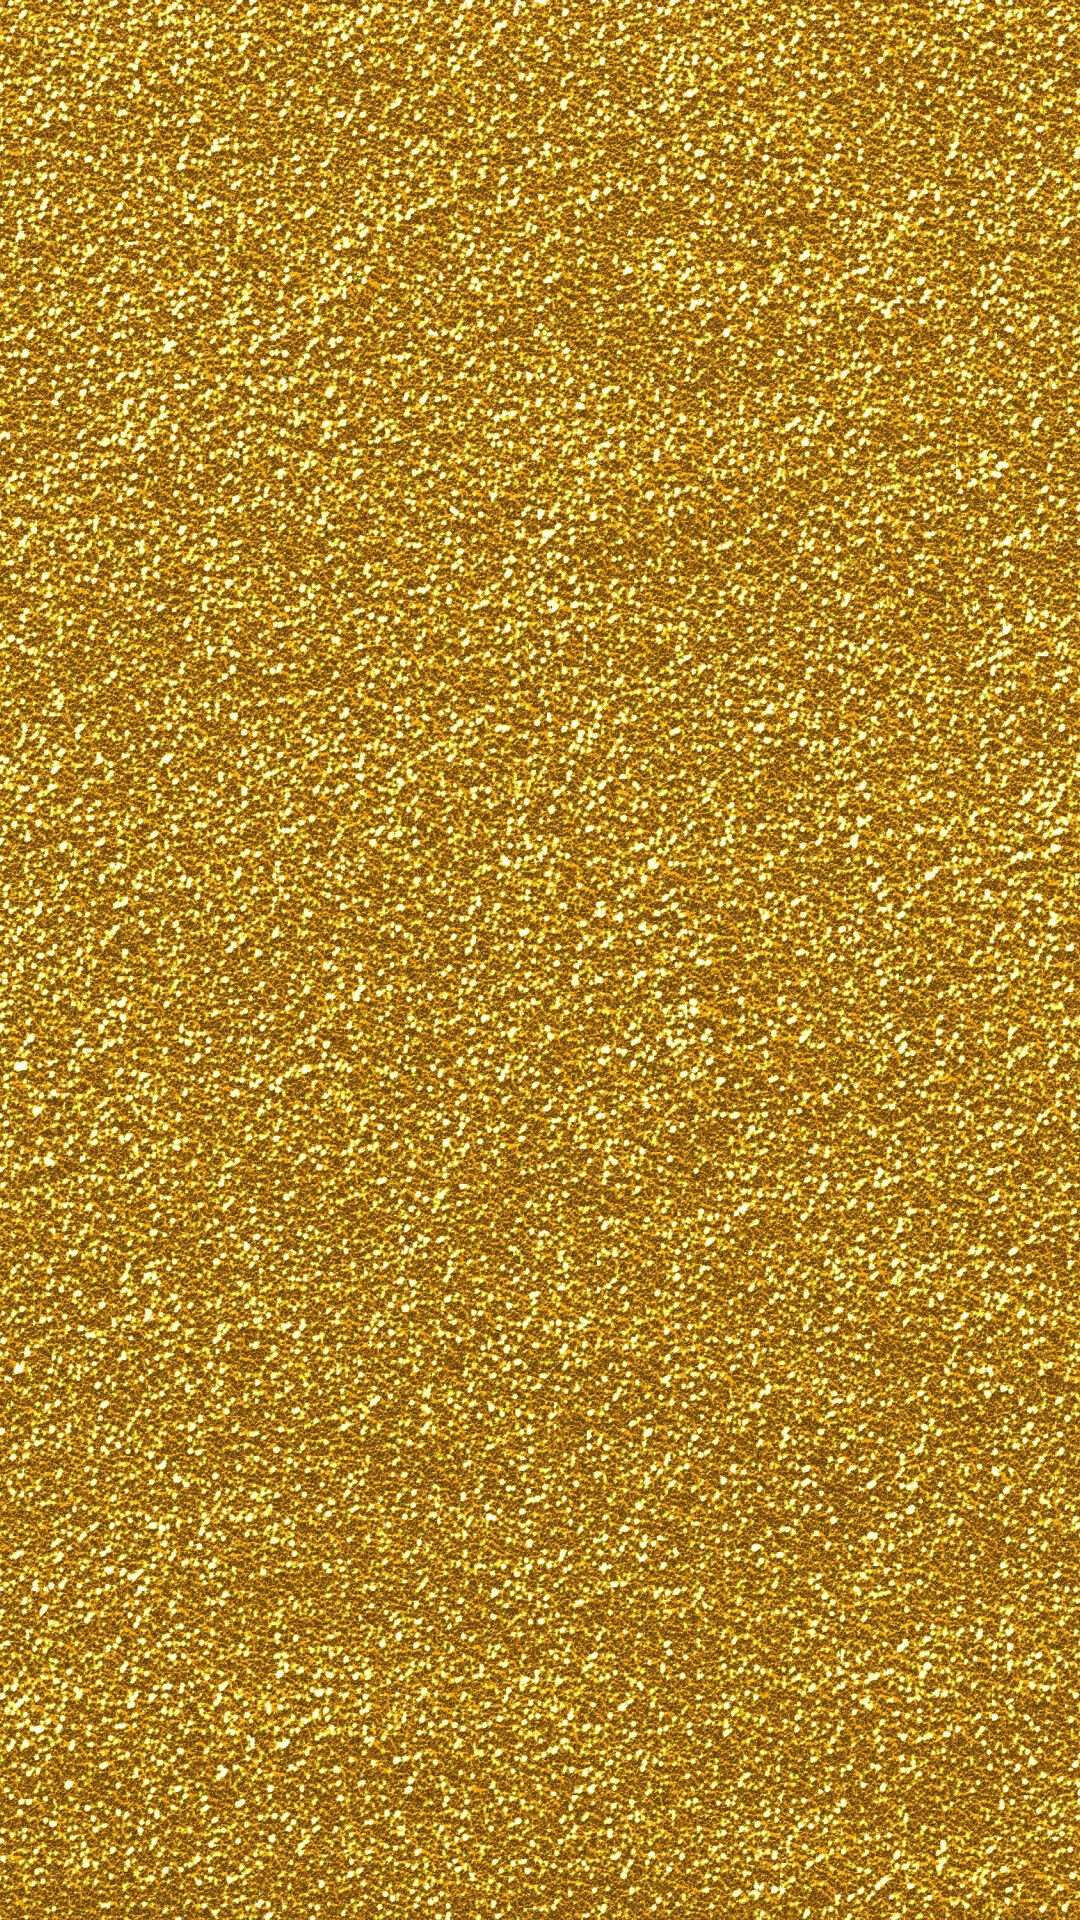 Gold Glitter: The glitter of a pure 24 karat precious metal, Soft and rare chemical element. 1080x1920 Full HD Background.